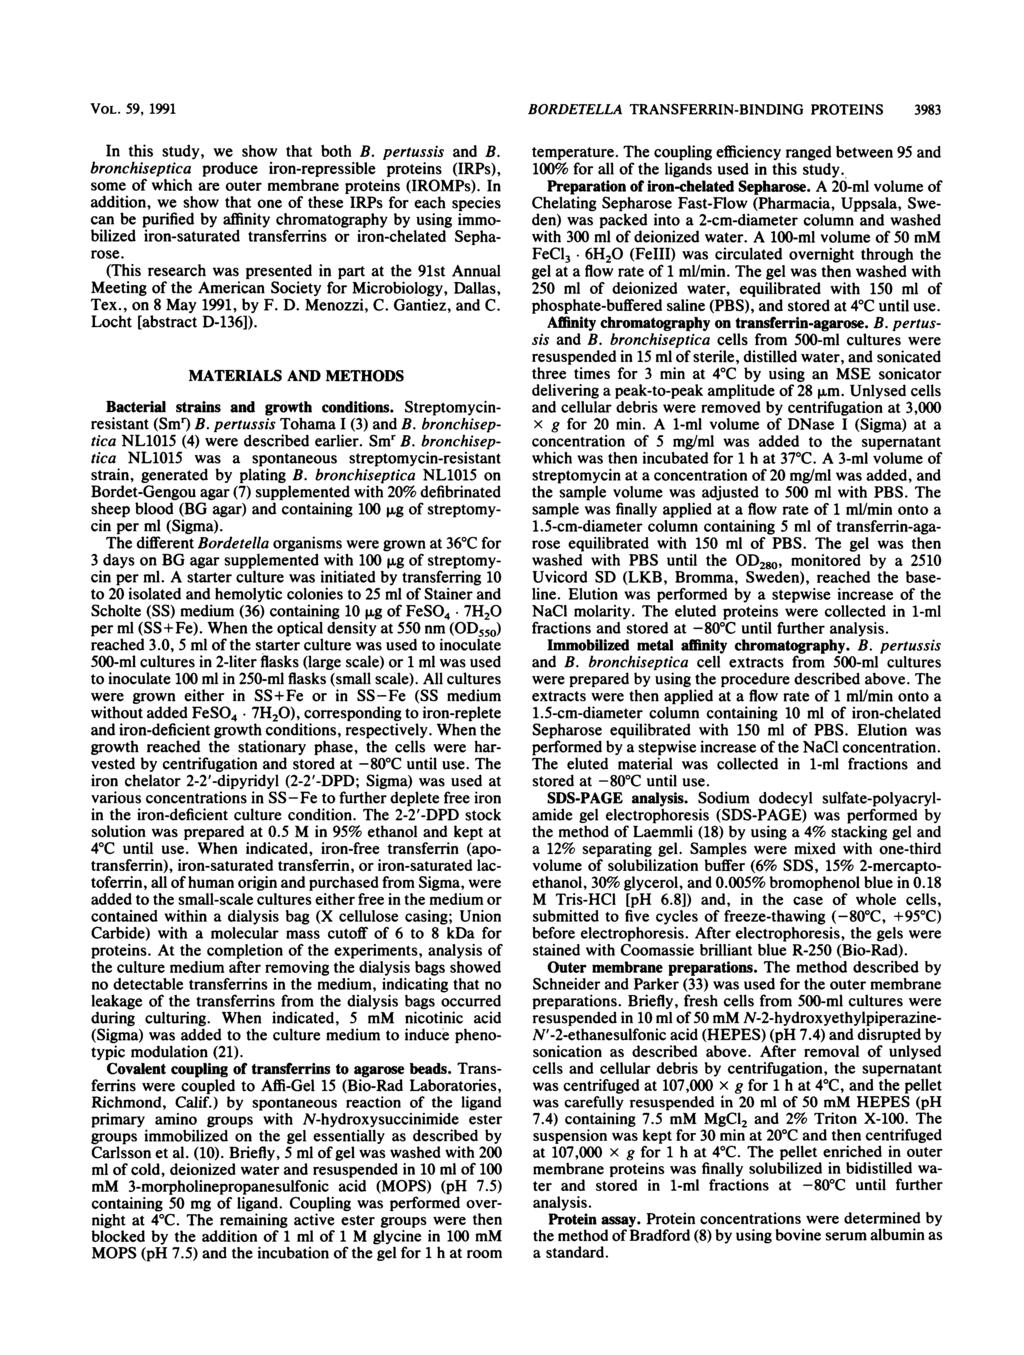 VOL. 59, 1991 In this study, we show that both B. pertussis and B. bronchiseptica produce iron-repressible proteins (IRPs), some of which are outer membrane proteins (IROMPs).